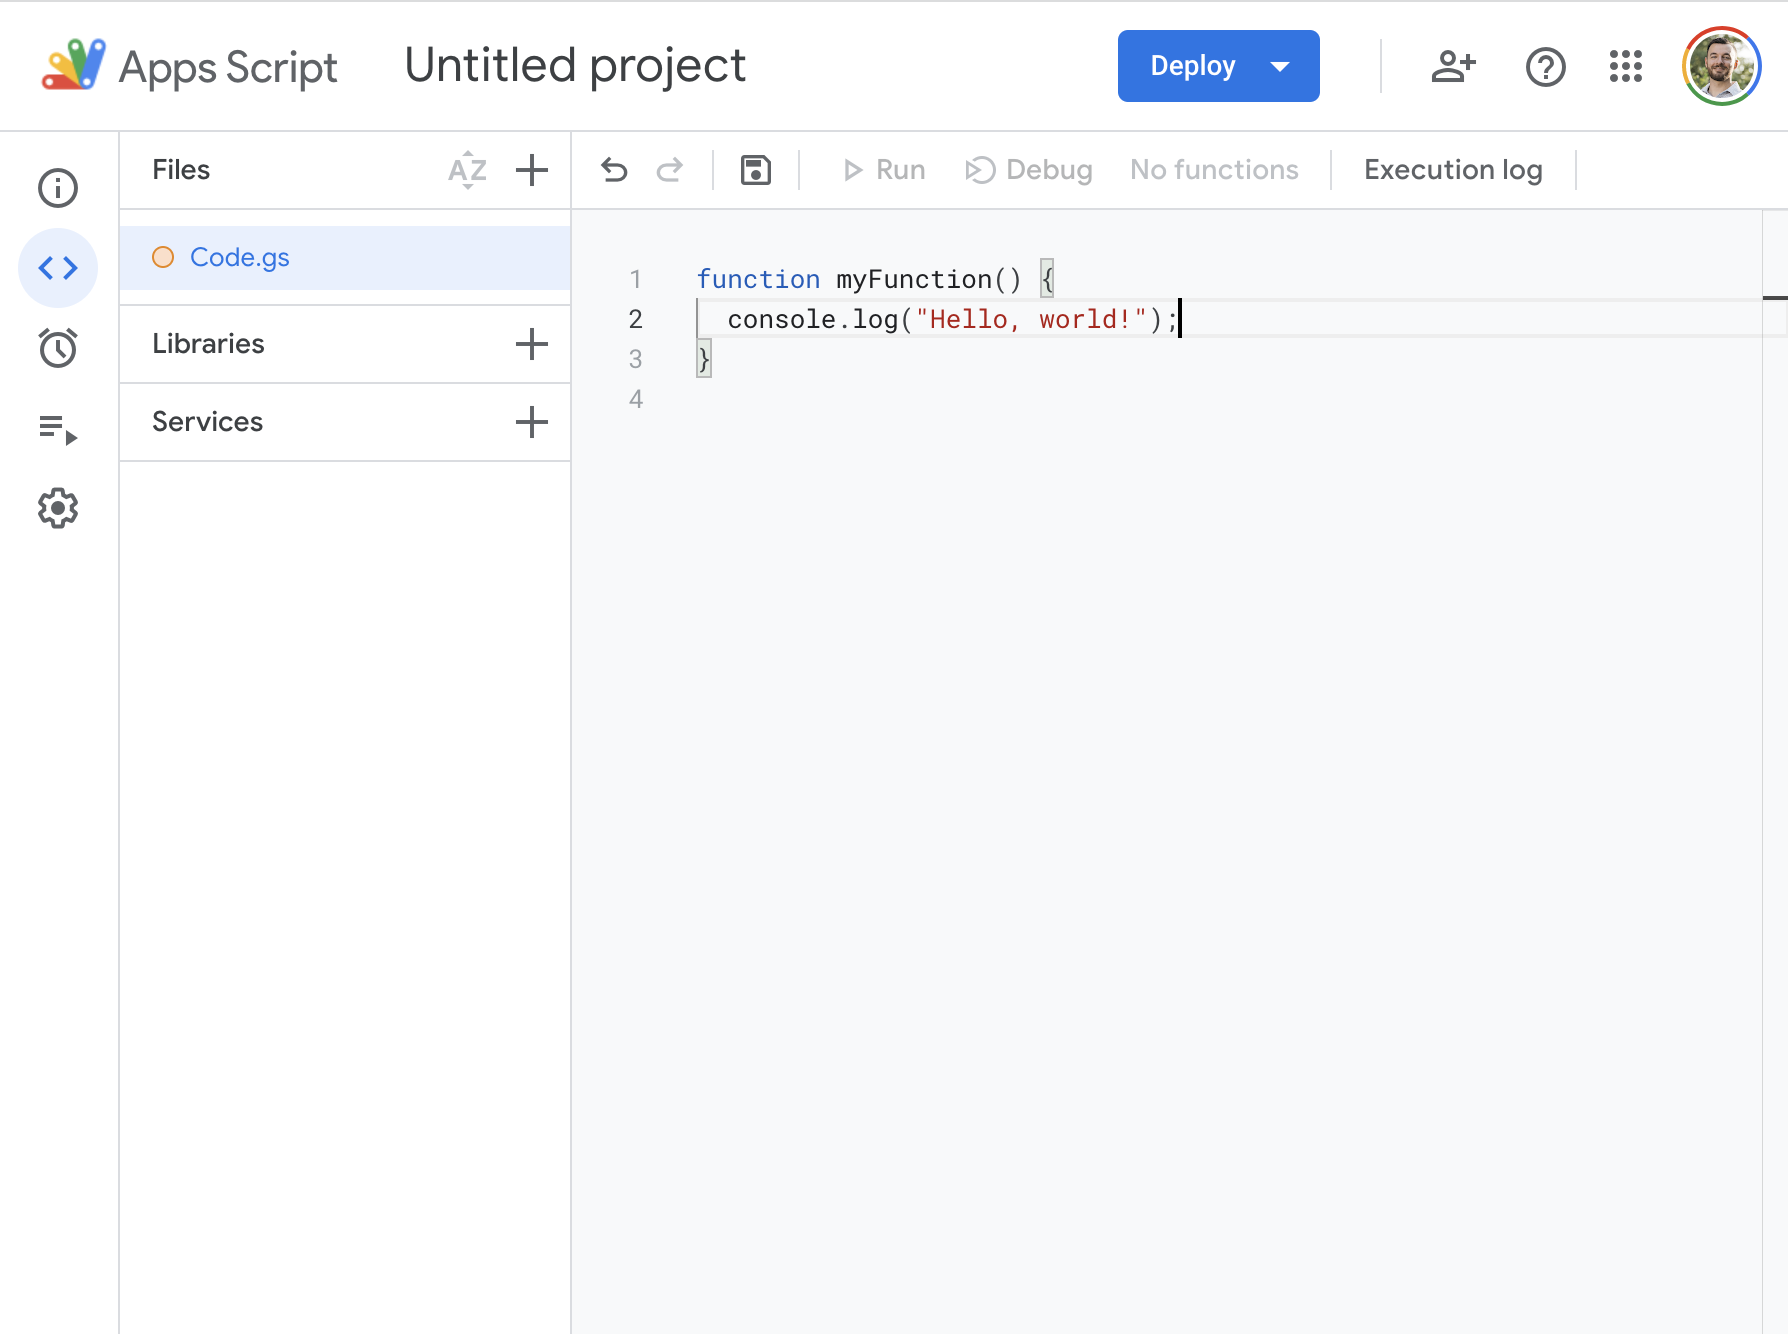 A screenshot of the Google Apps Script interface with a "Hello, world!"
script.